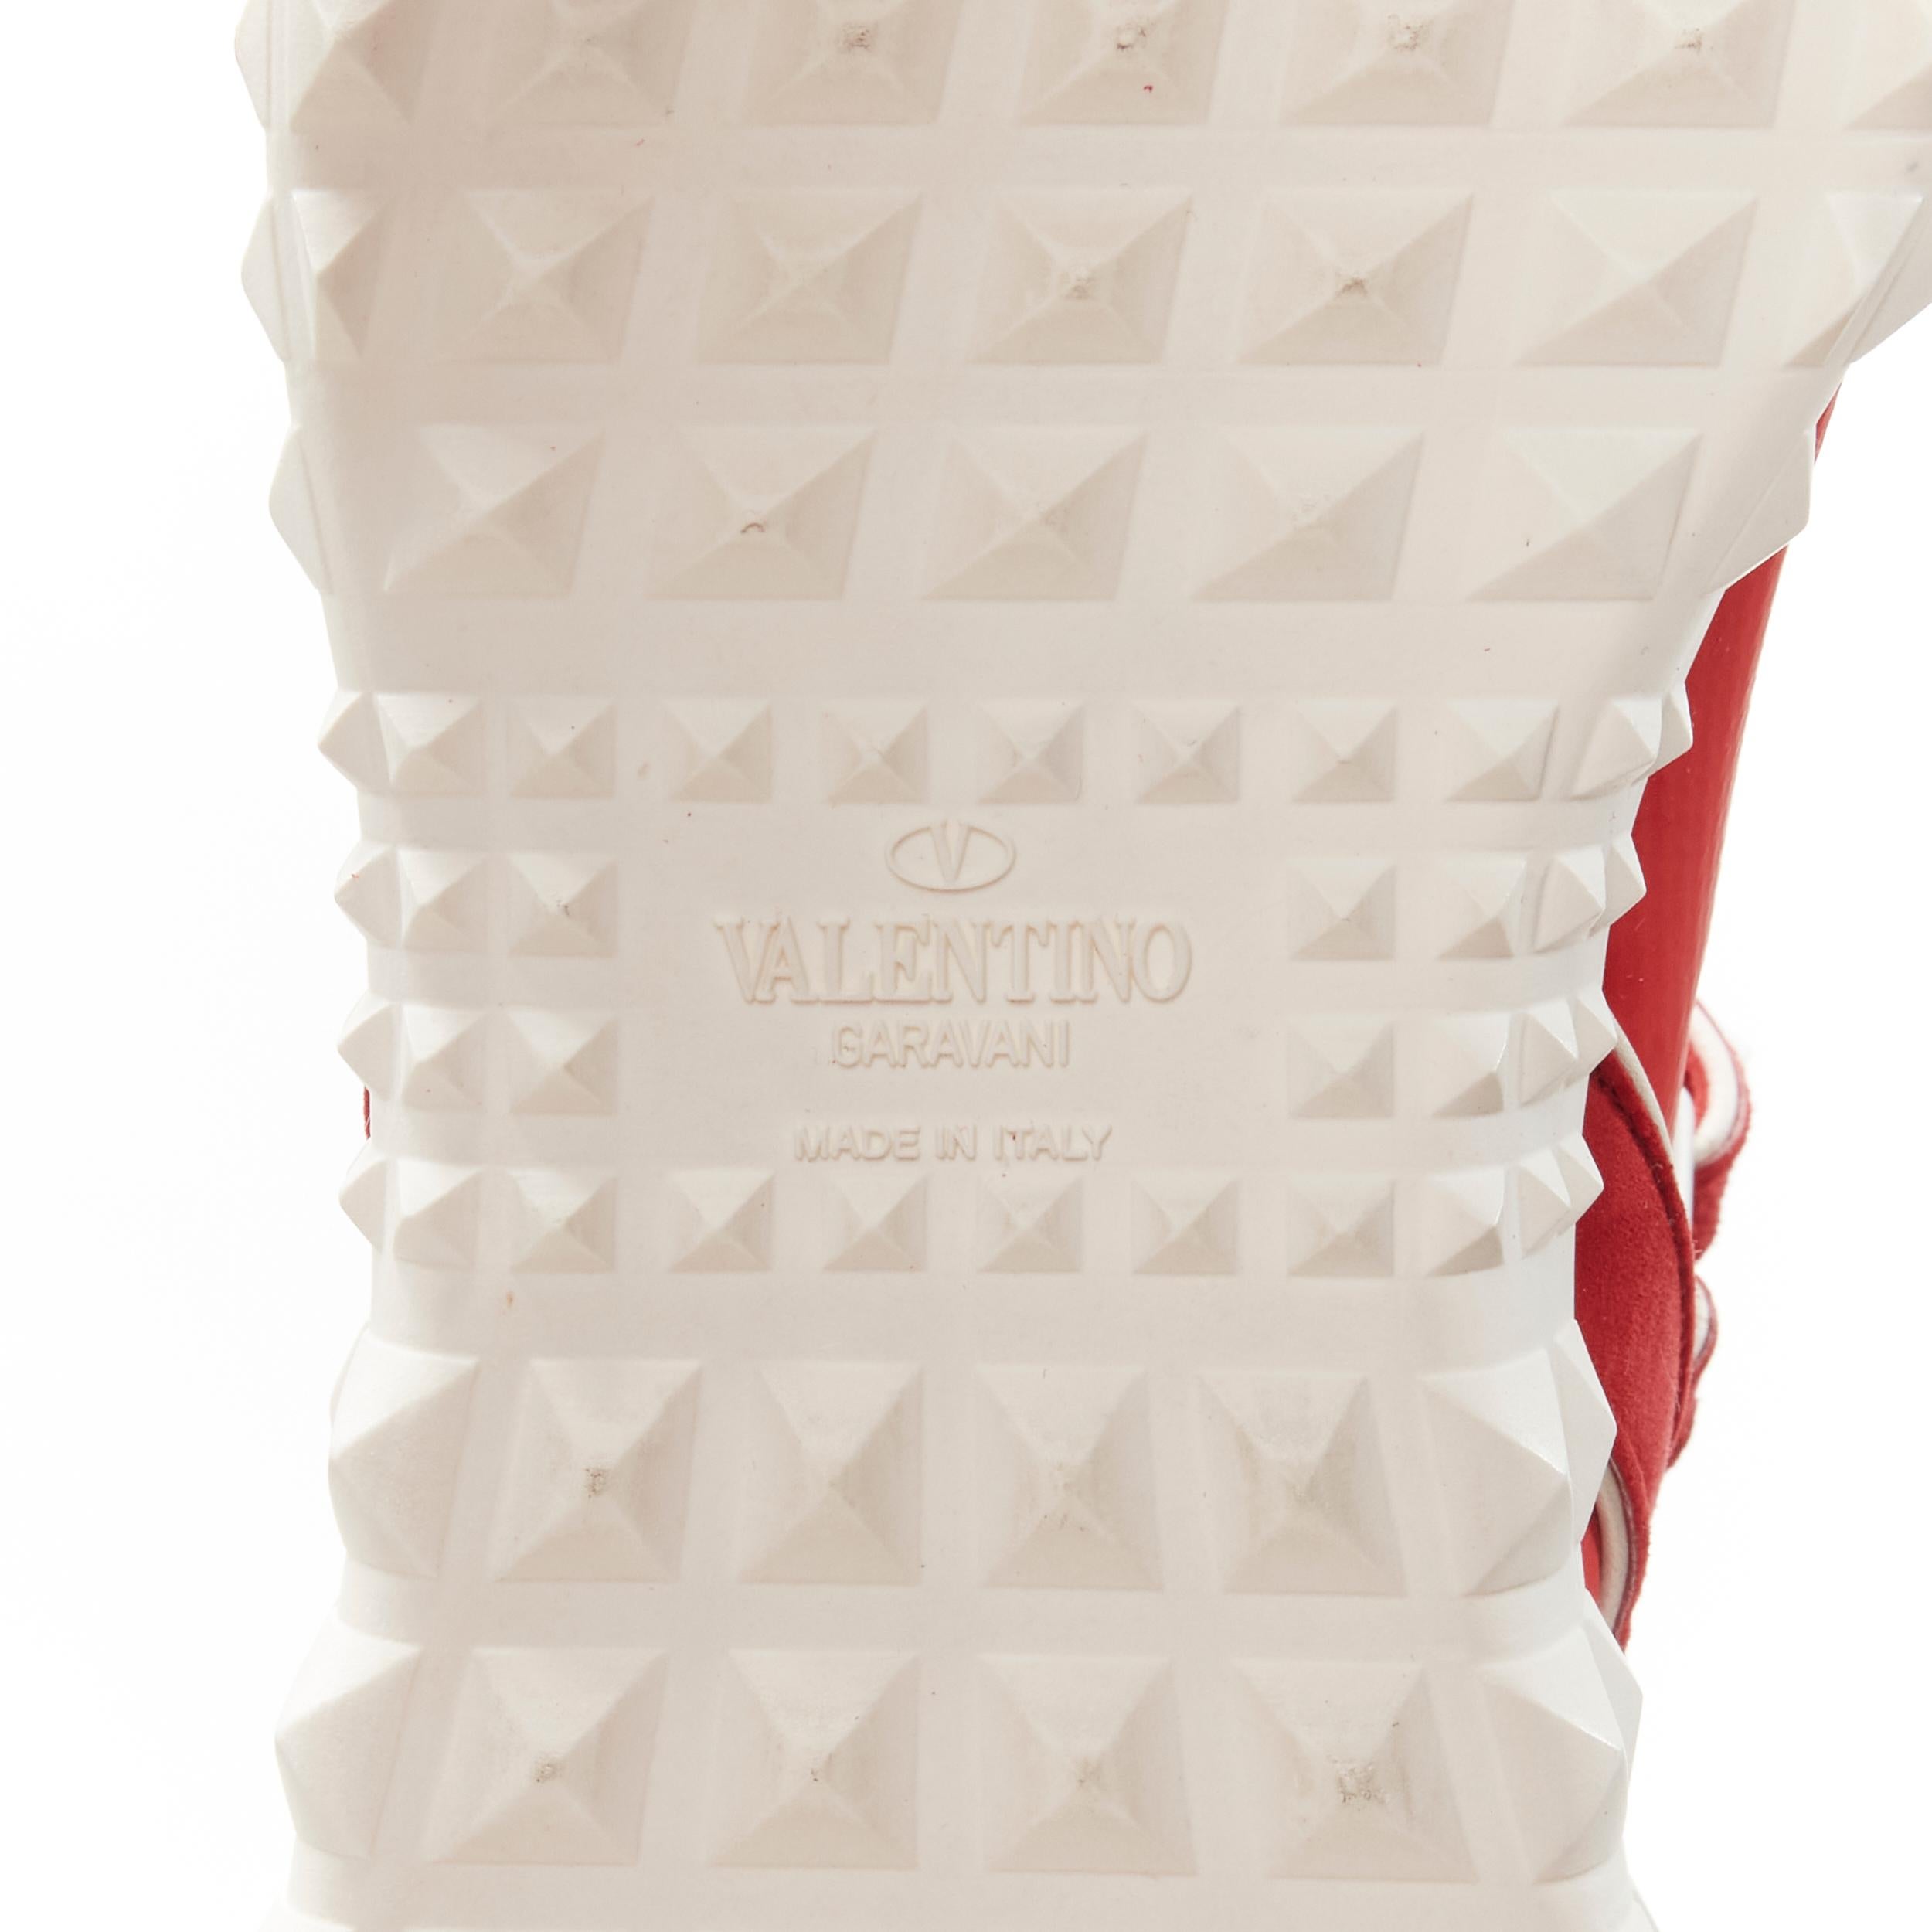 VALENTINO Free Rockstud Bodytech red sock knit white stud high top sneaker EU36 For Sale 5